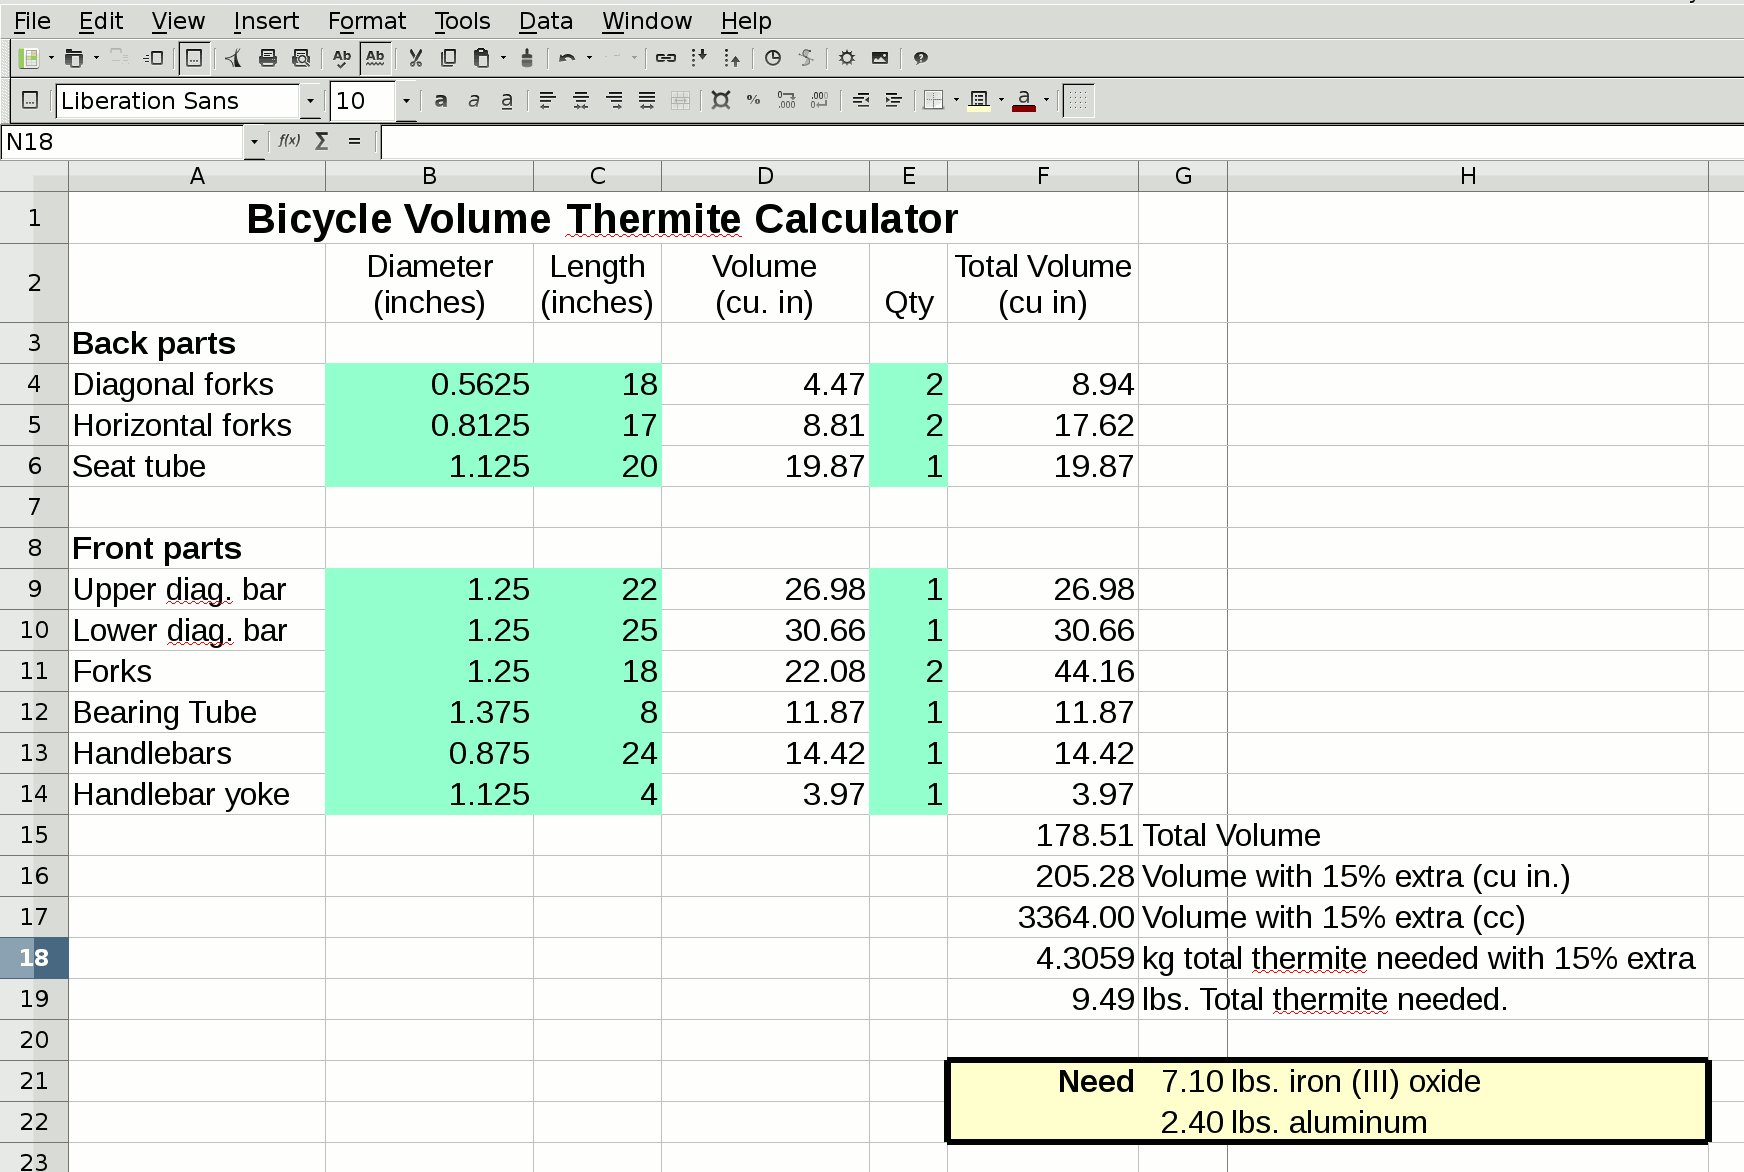 This spreadsheet calculates the amount of thermite needed to vaporize a bicycle.